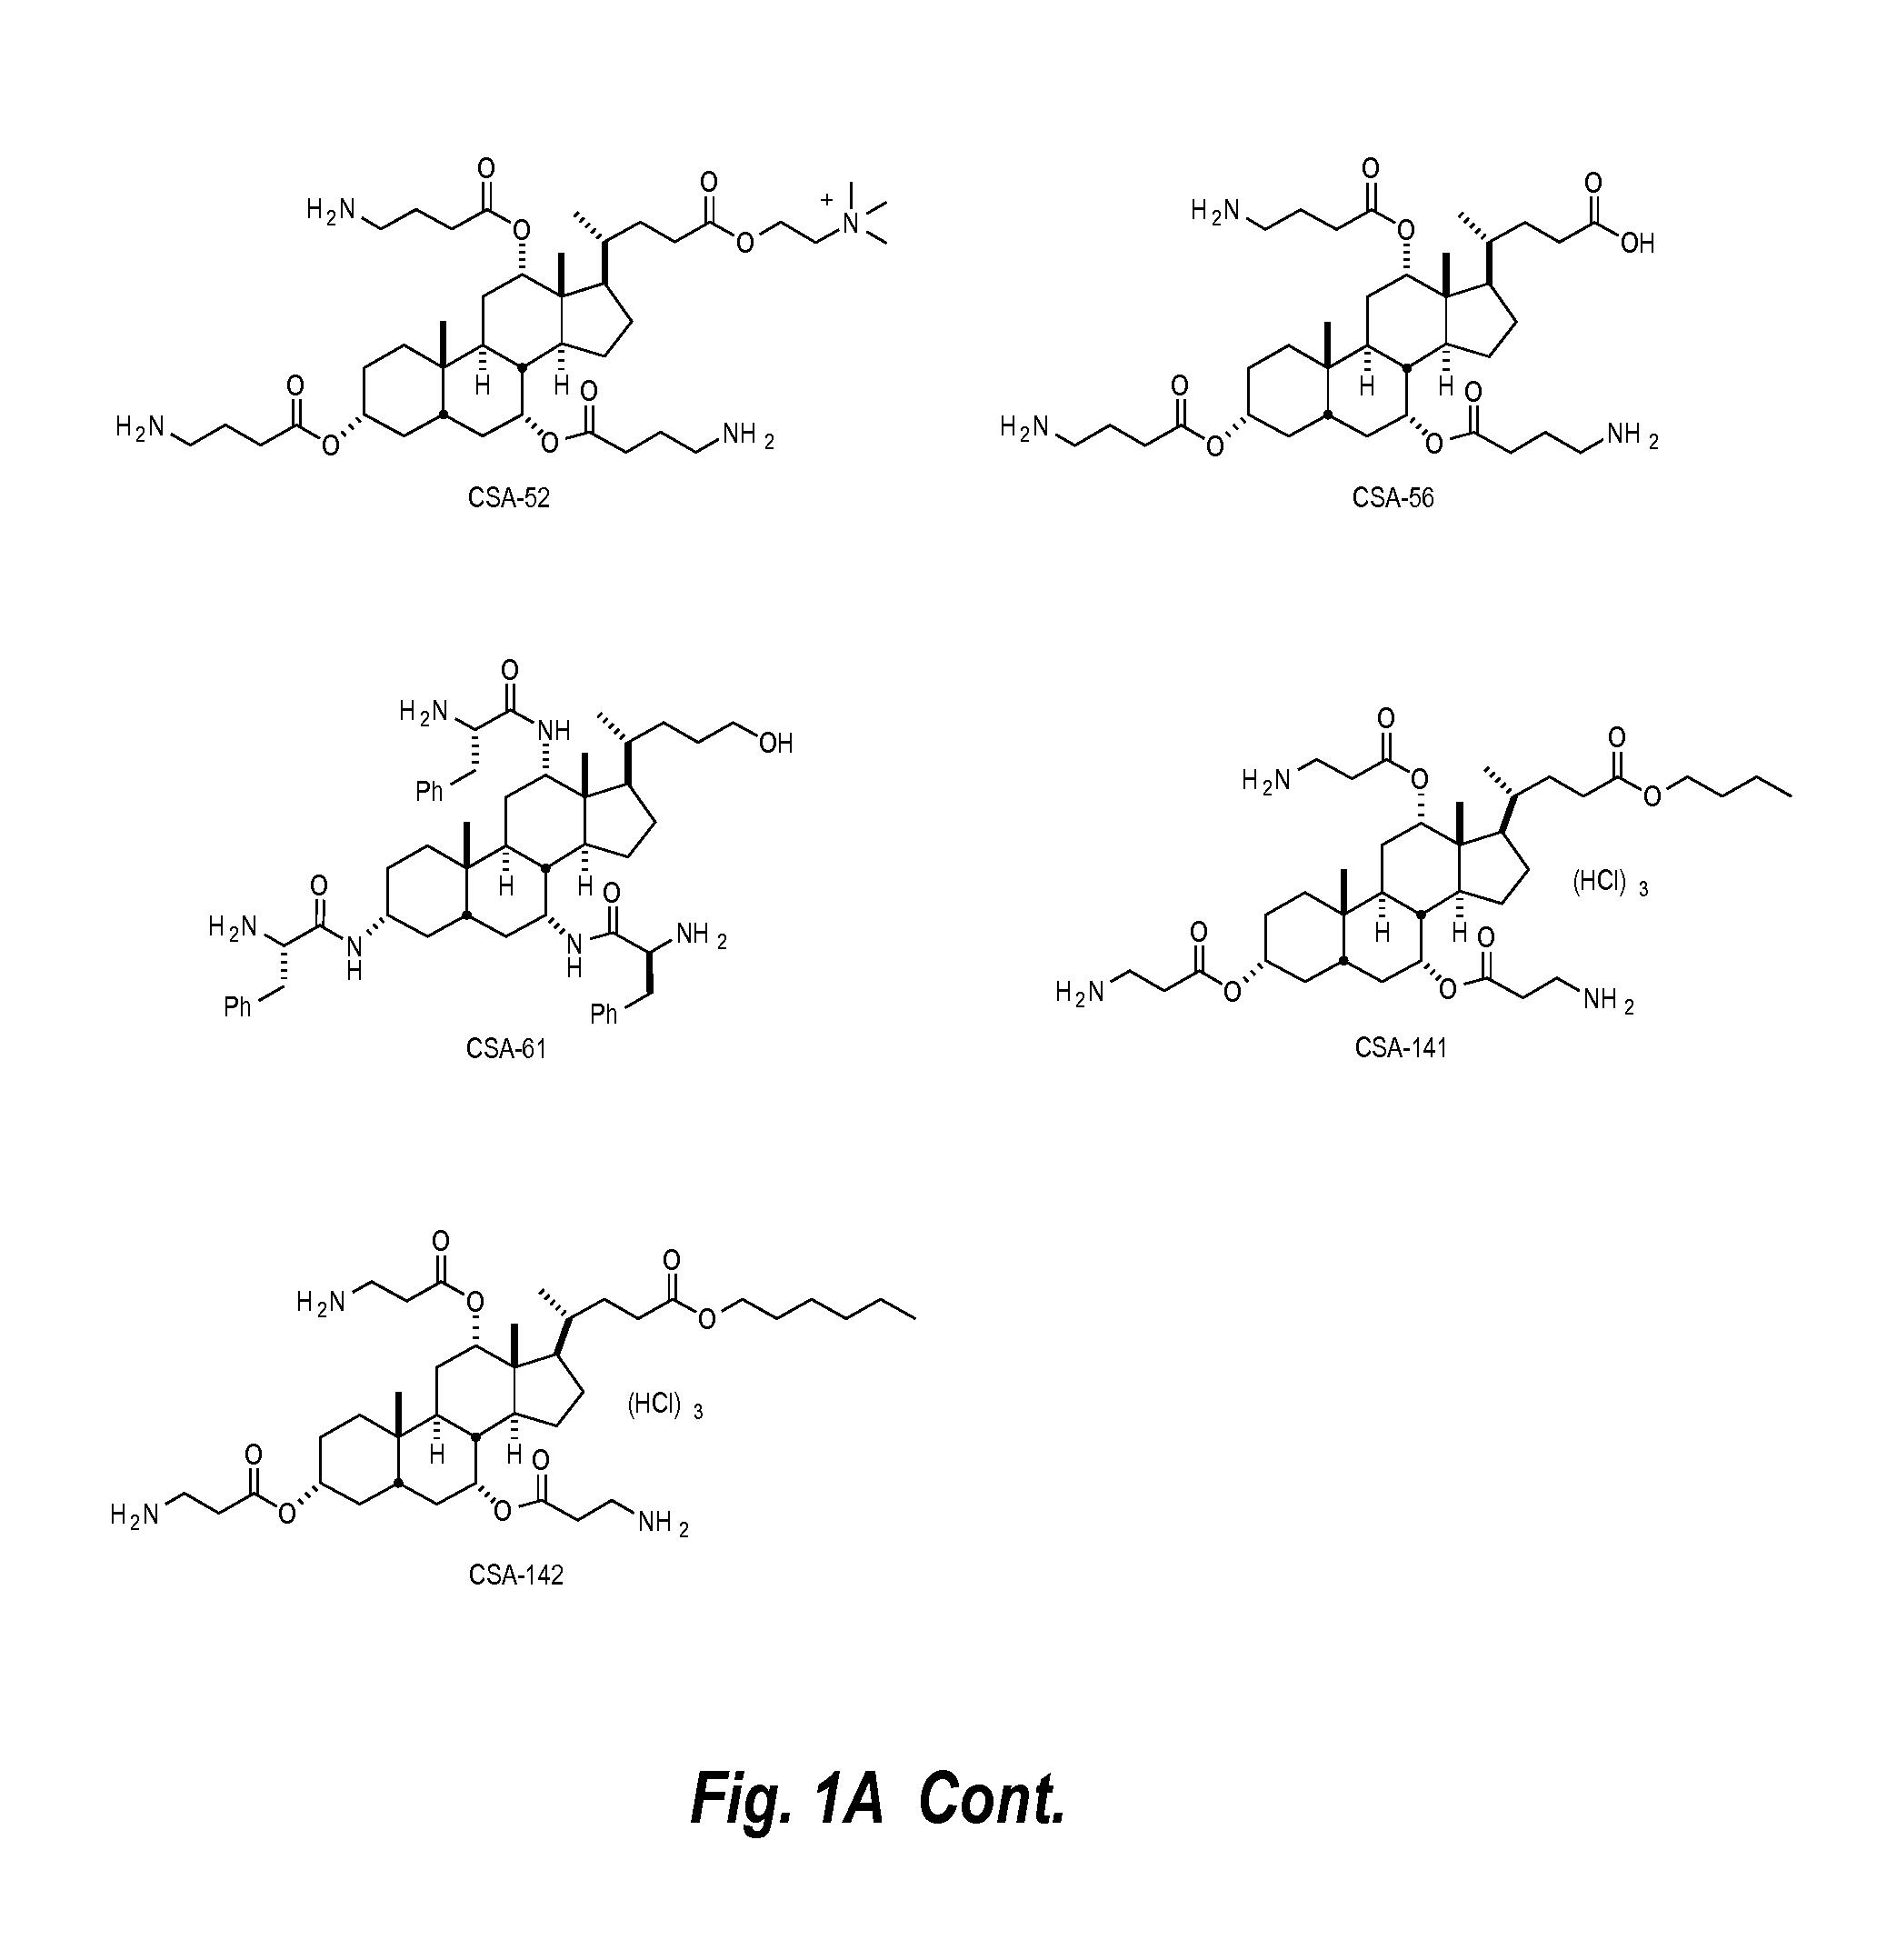 Anti-microbial food processing compositions including ceragenin compounds and methods of use